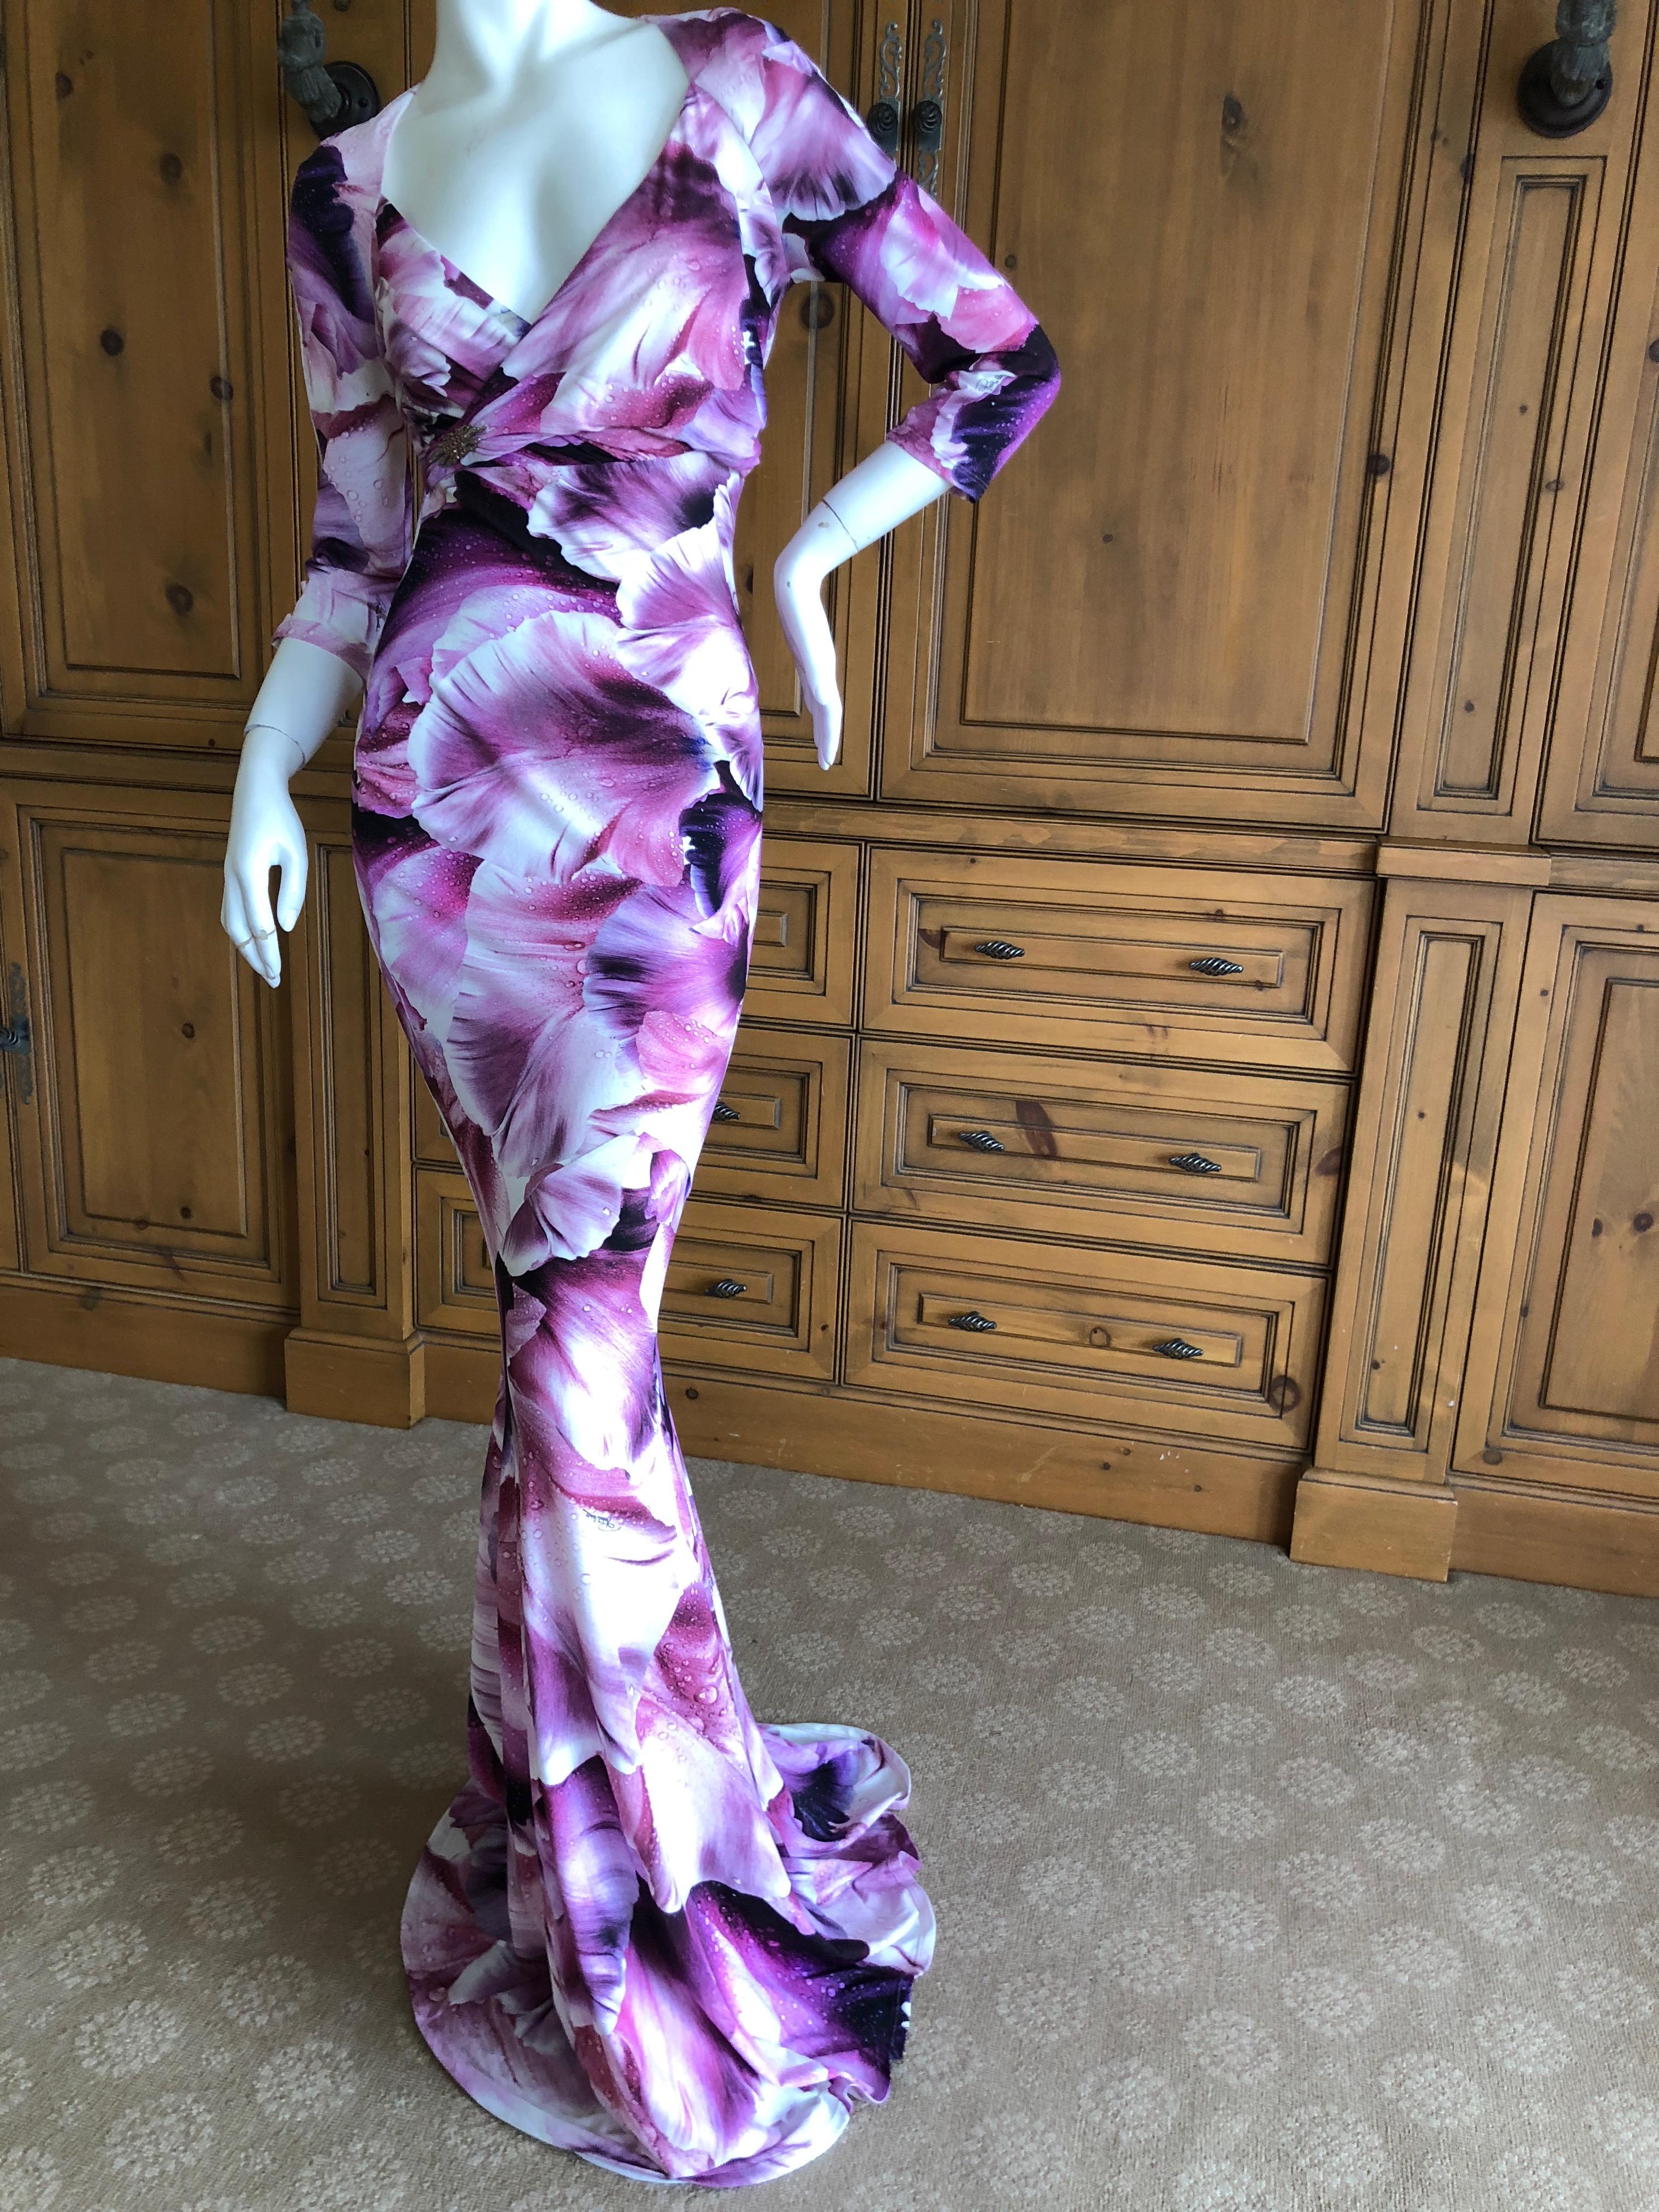 Roberto Cavalli Vintage Orchid Print Pink and Black  Evening Dress .
There is a lot of stretch in this.
Size 40 
Bust  36